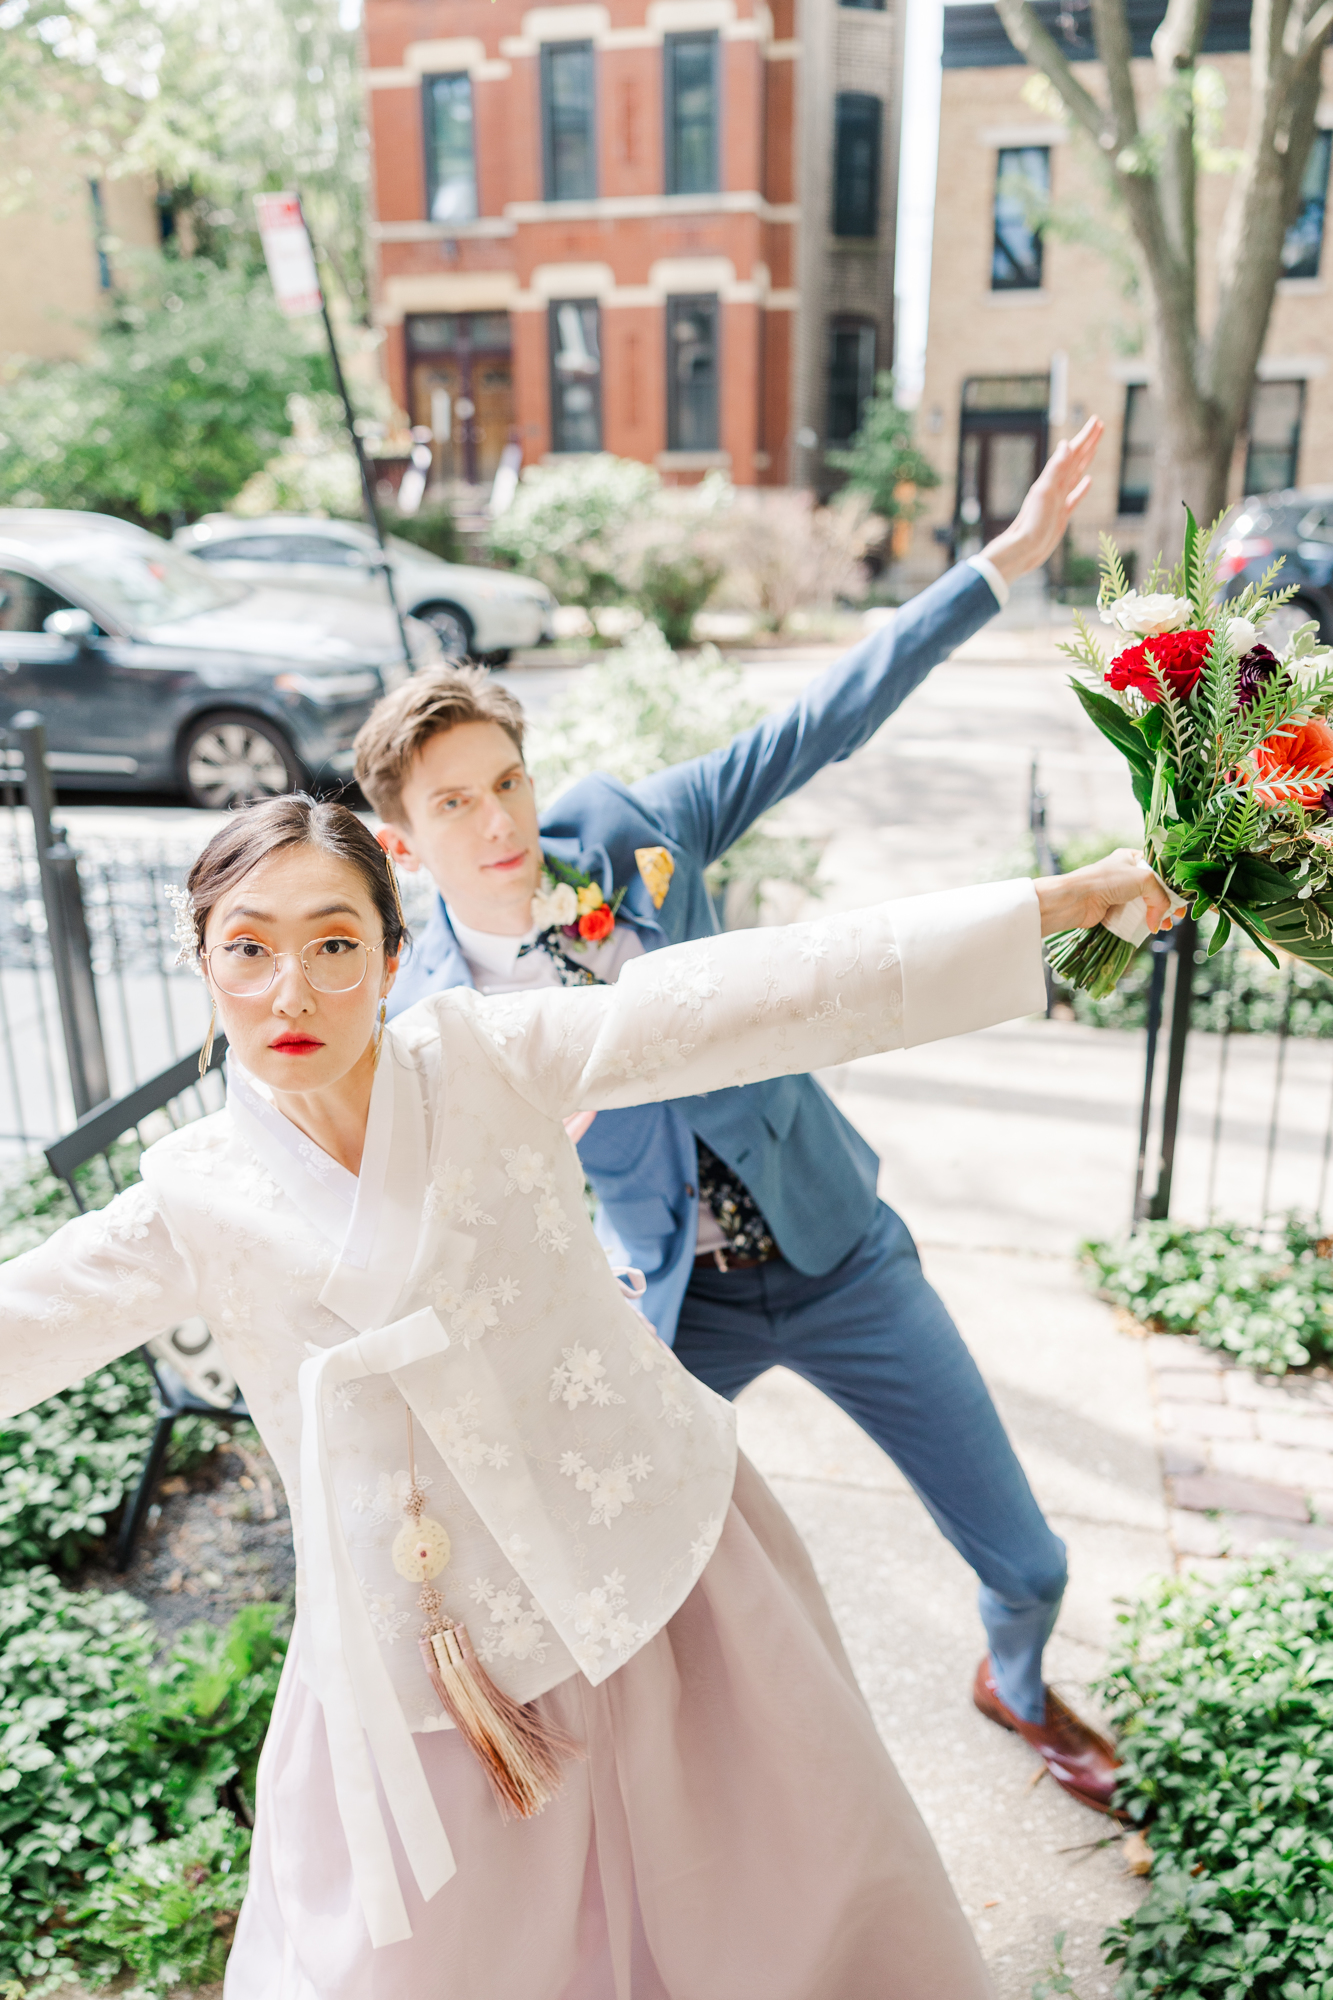 Whimsical Chicago Micro Wedding Photos at Wicker Park Inn in Fall